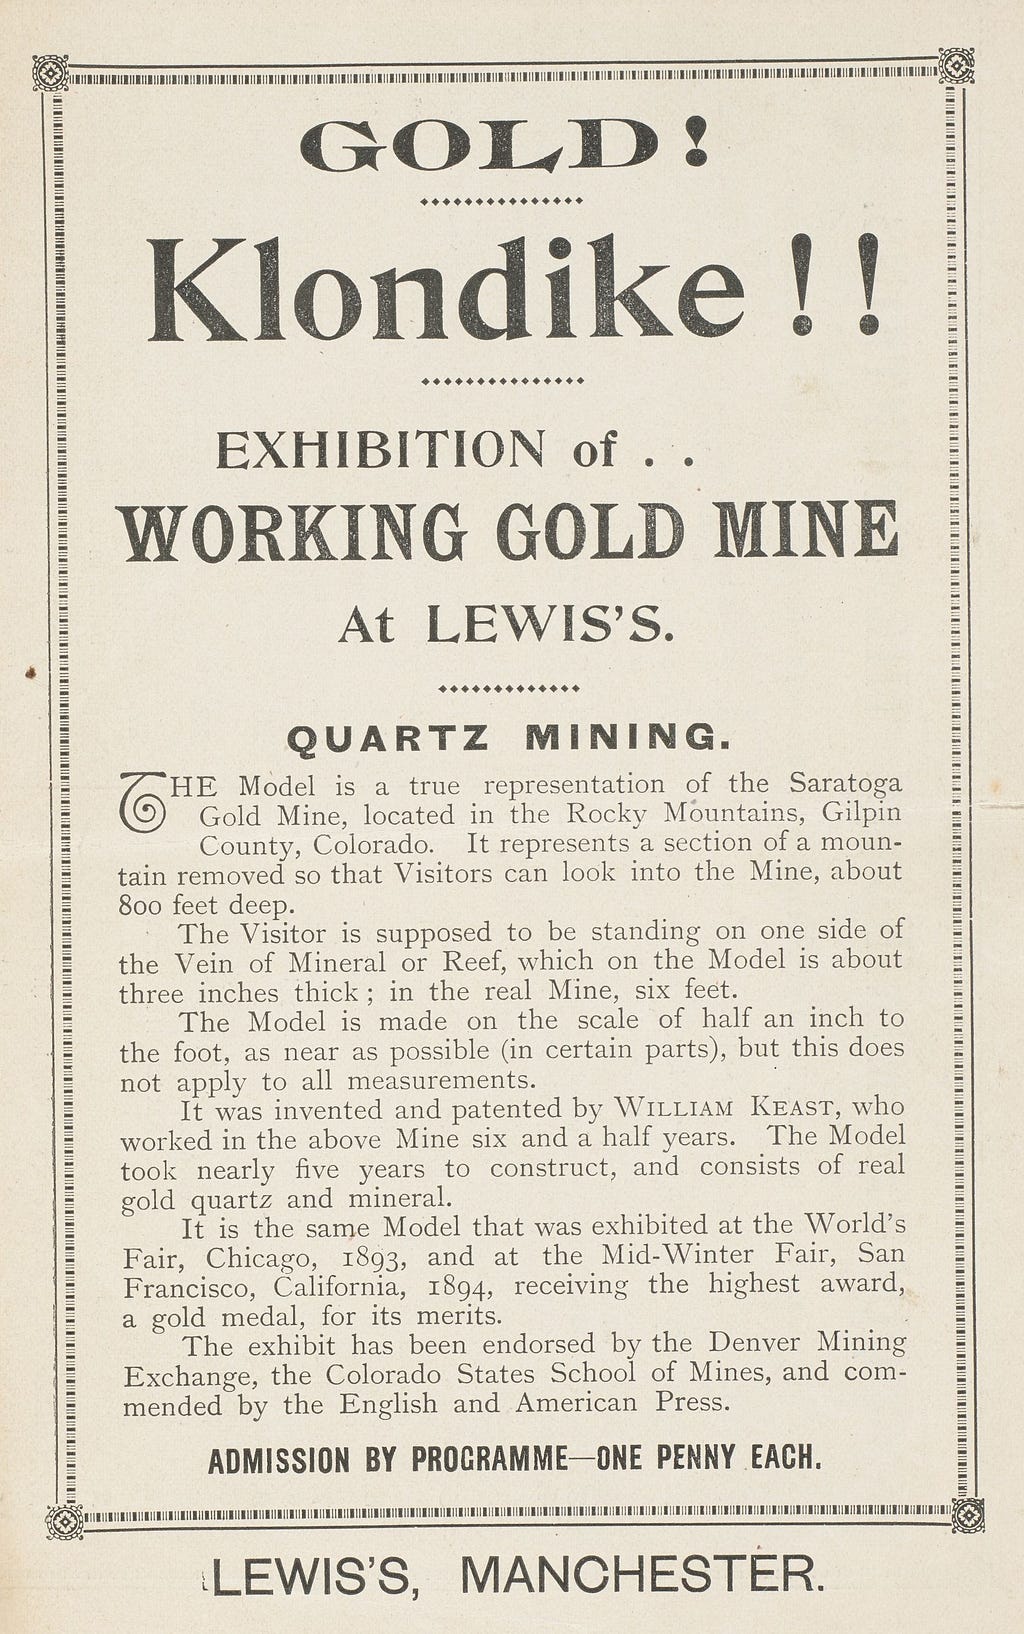 Page of text about William Keast’s model of a working gold mine, exhibited at Lewis’s in 1899. With a decorative border.